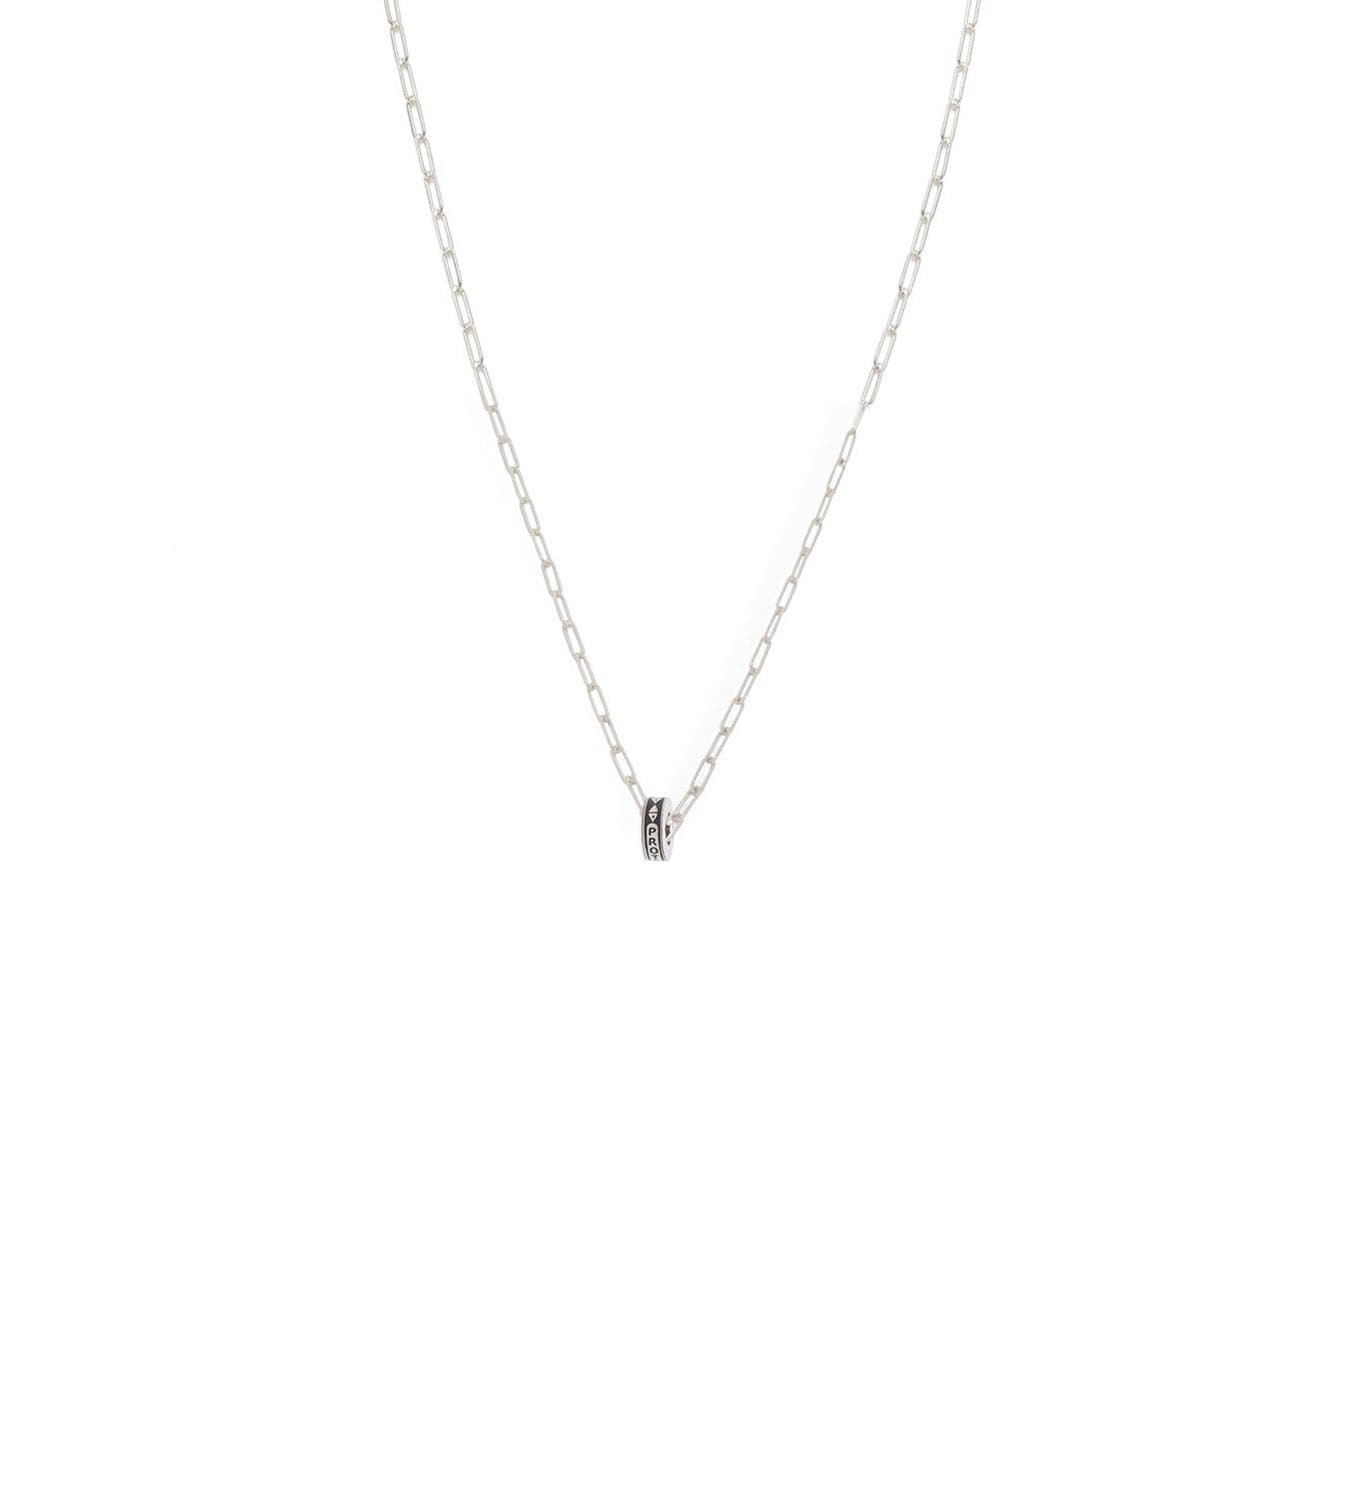 Protection : Heart Beat Super Fine Clip Chain Necklace White Gold